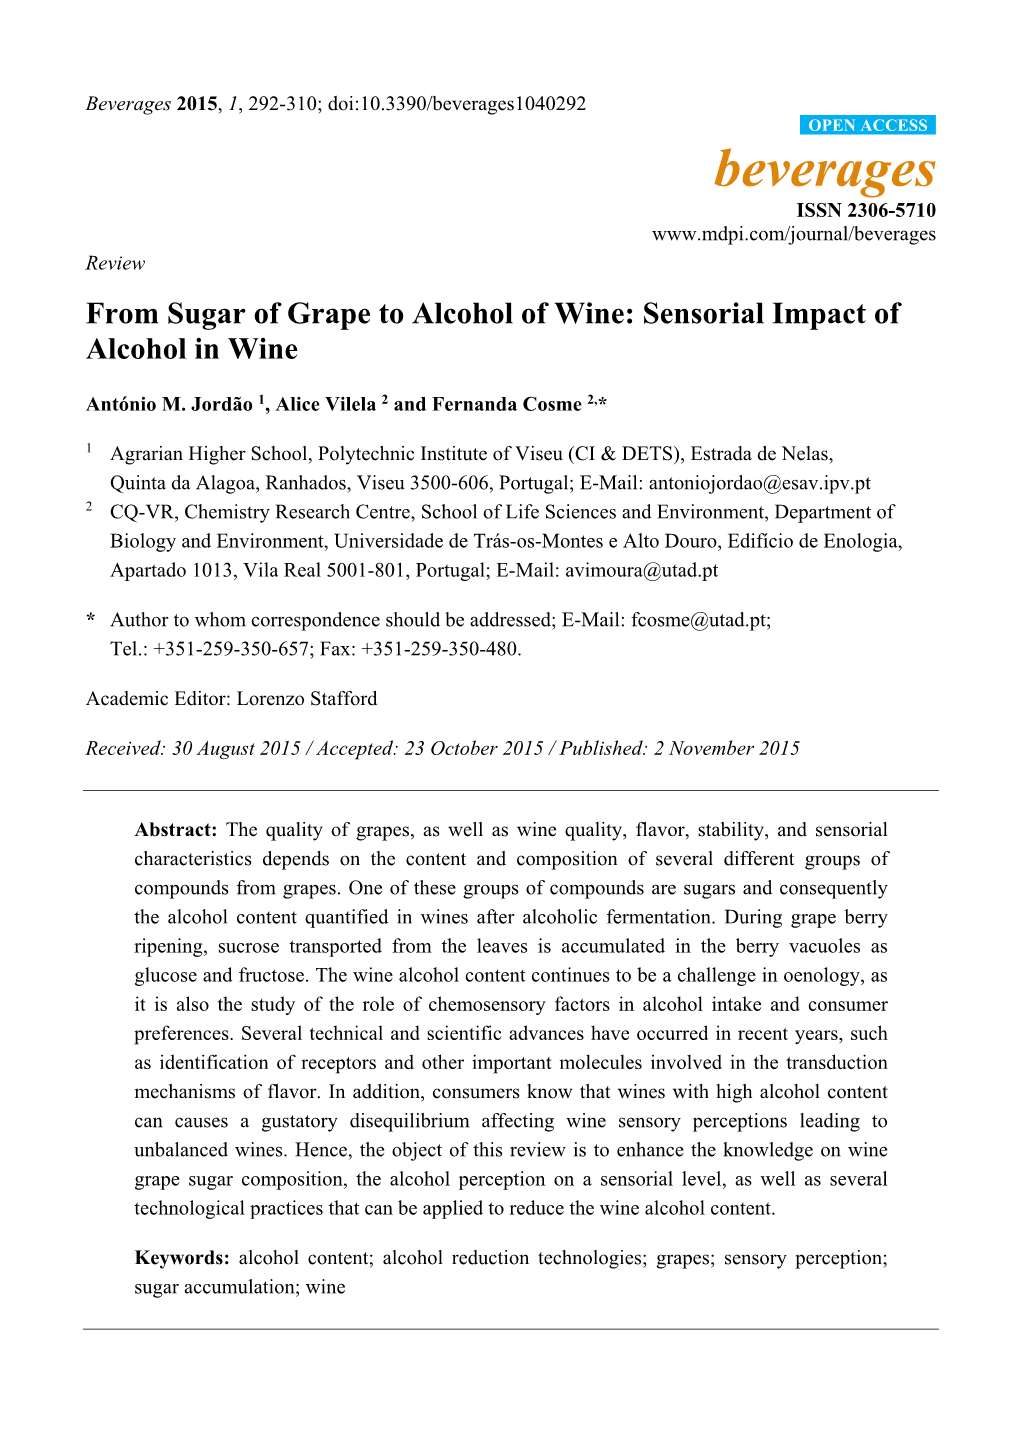 From Sugar of Grape to Alcohol of Wine: Sensorial Impact of Alcohol in Wine